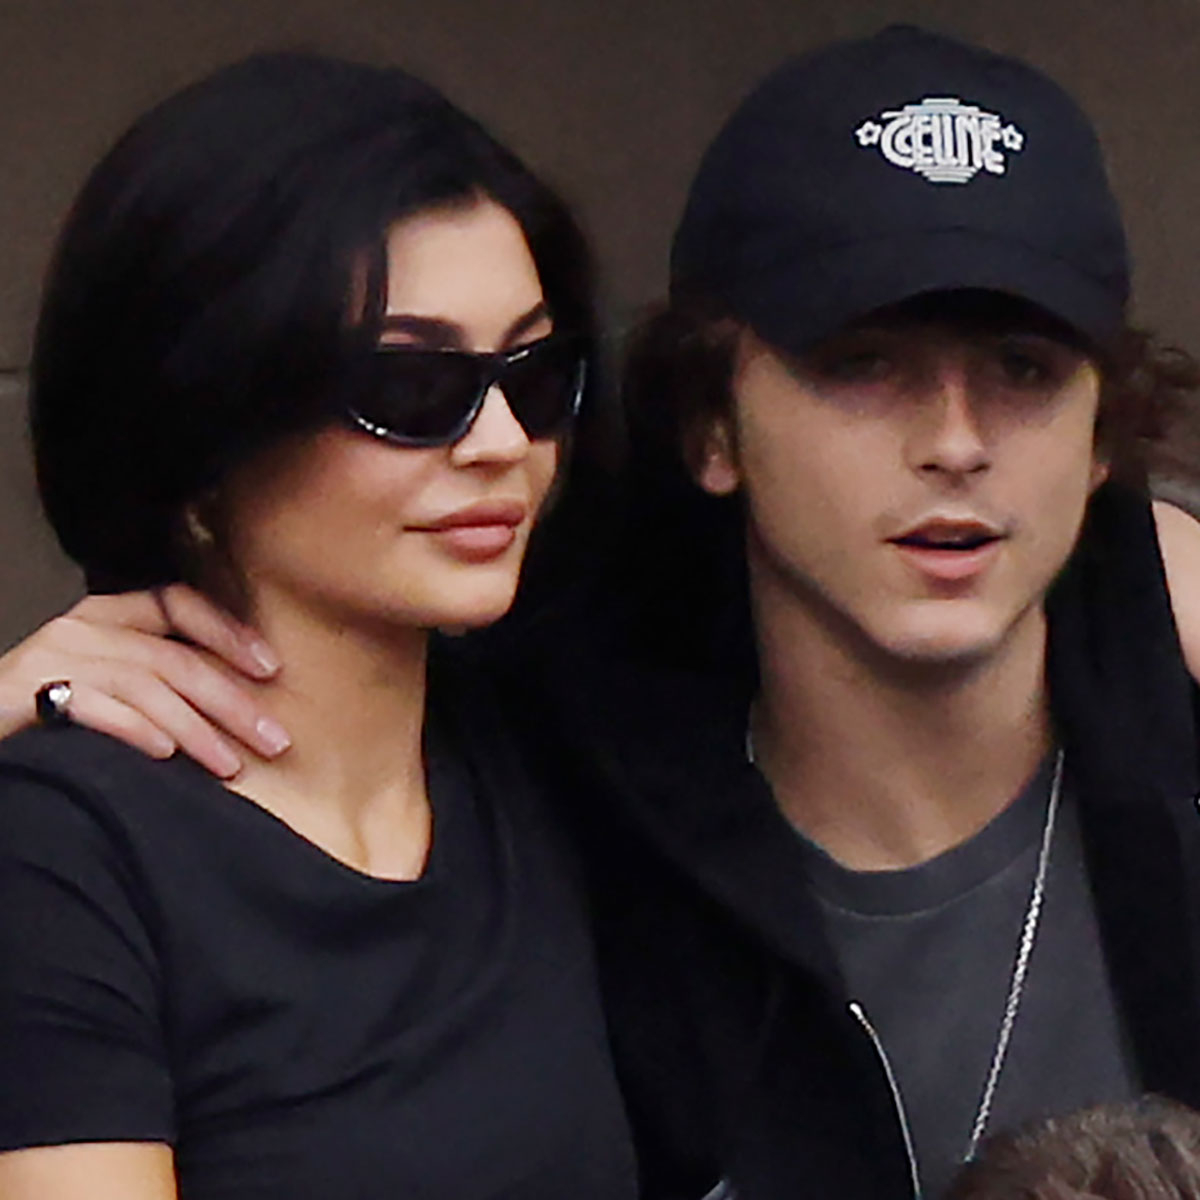 They just had eyes for each other': Kylie Jenner and Timothee Chalamet have  a 'secure' relationship, were 'all over each other' during US Open